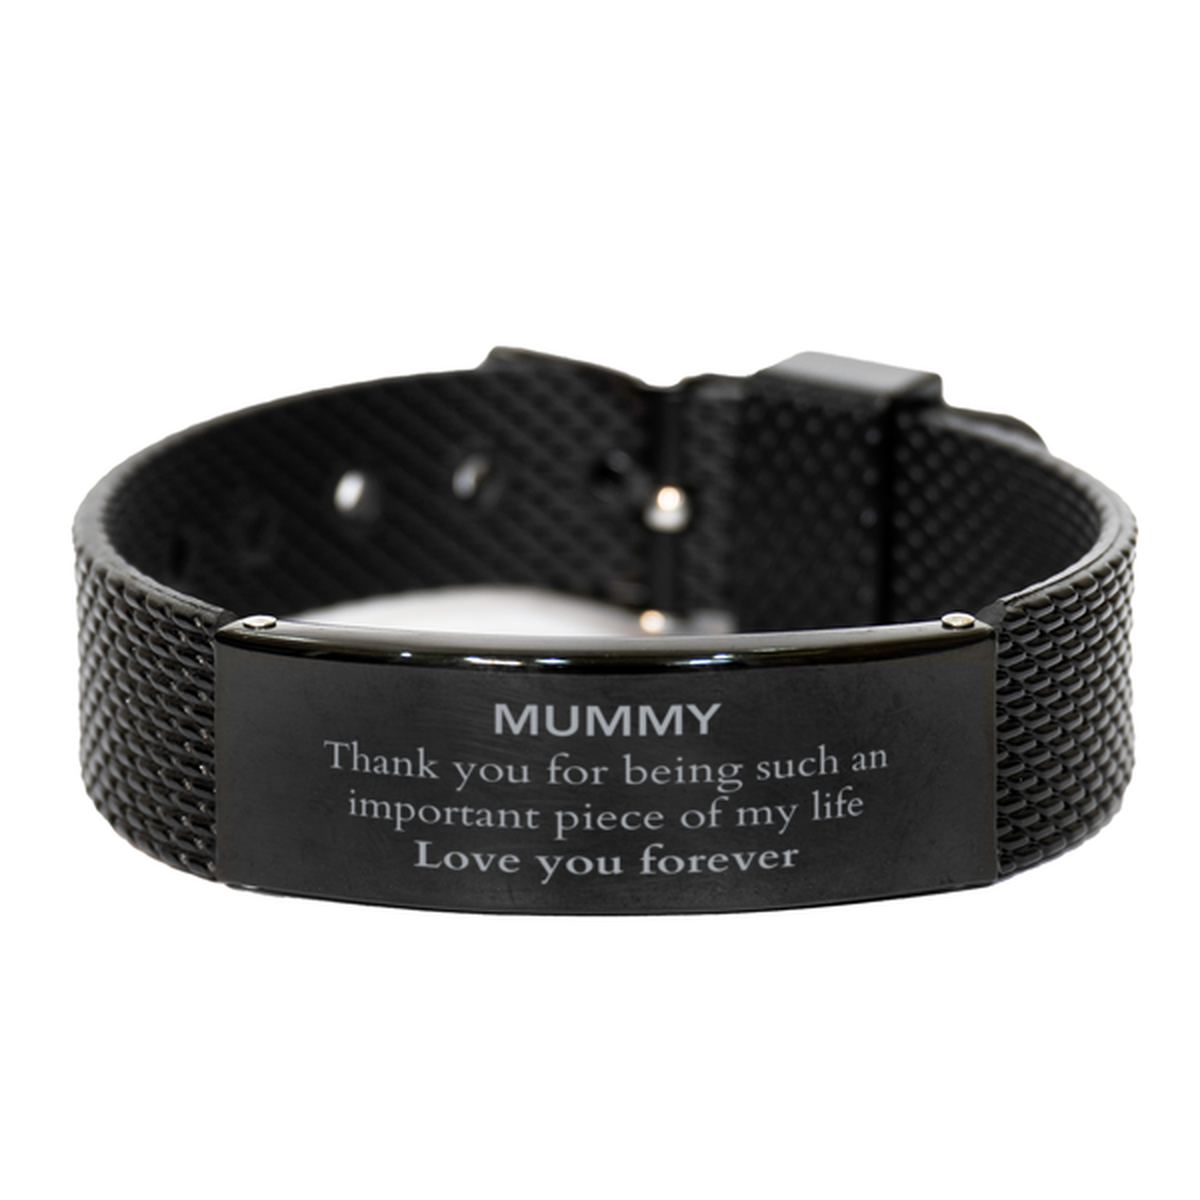 Appropriate Mummy Black Shark Mesh Bracelet Epic Birthday Gifts for Mummy Thank you for being such an important piece of my life Mummy Christmas Mothers Fathers Day